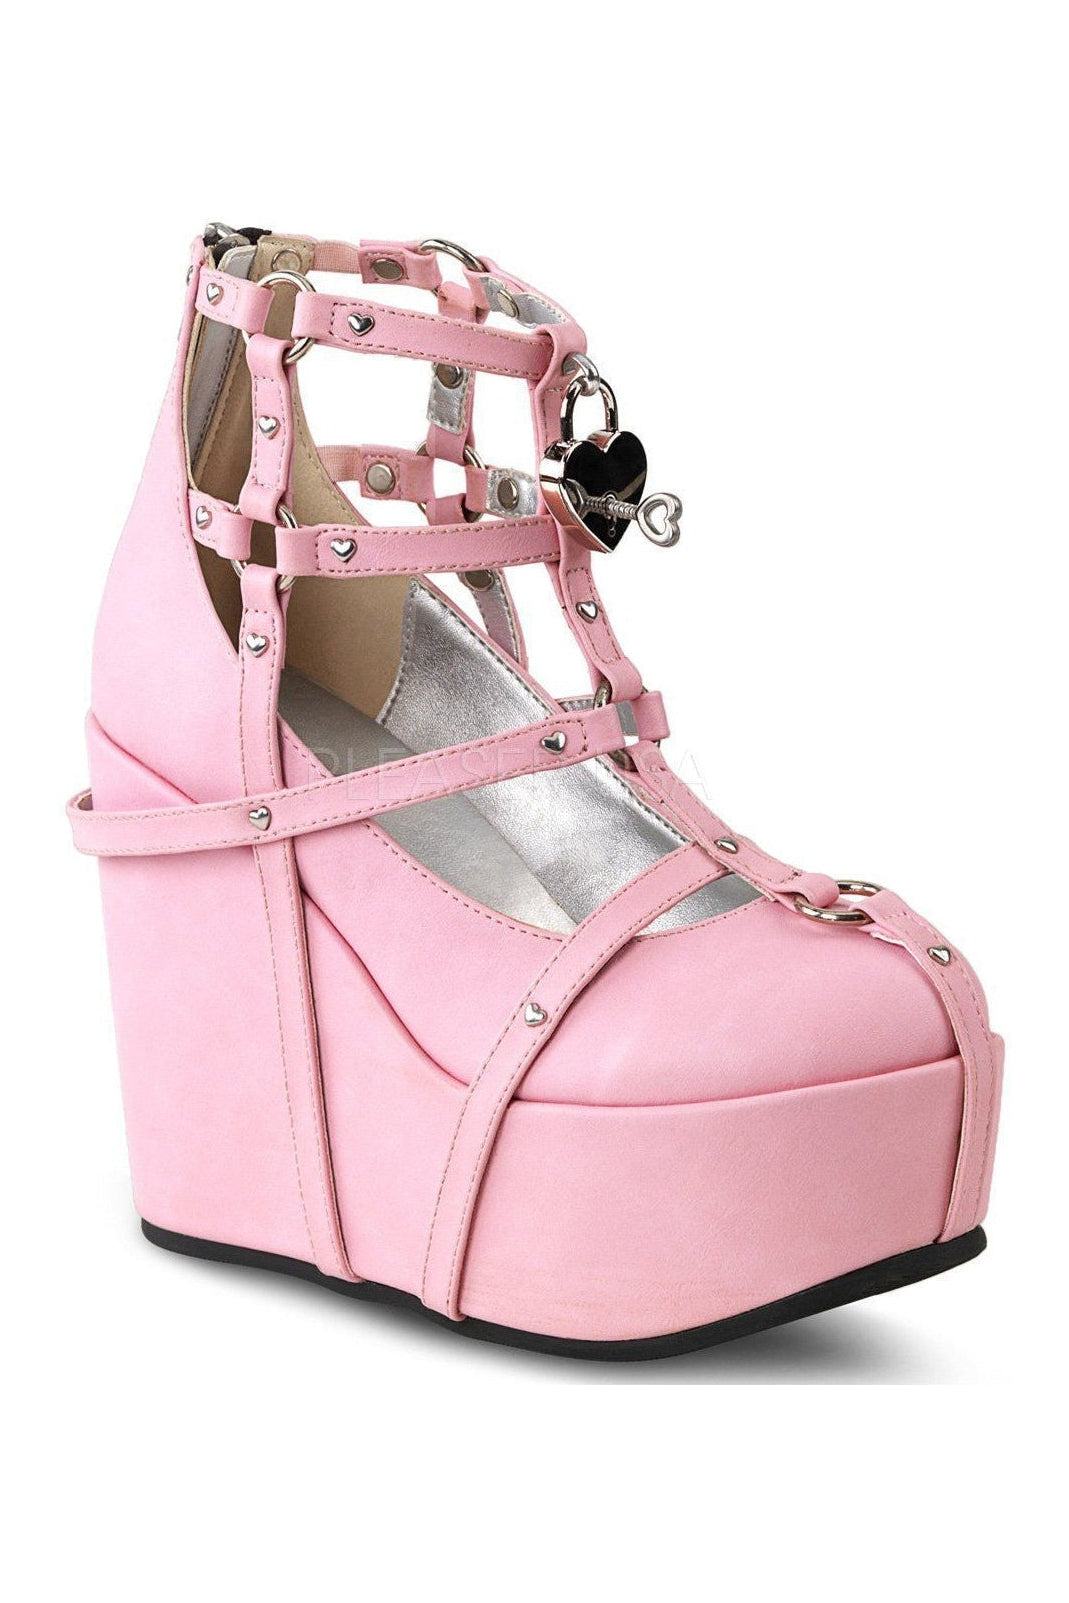 POISON-25-2 Demonia Wedge | Pink Faux Leather-Demonia-Pink-Wedges-SEXYSHOES.COM